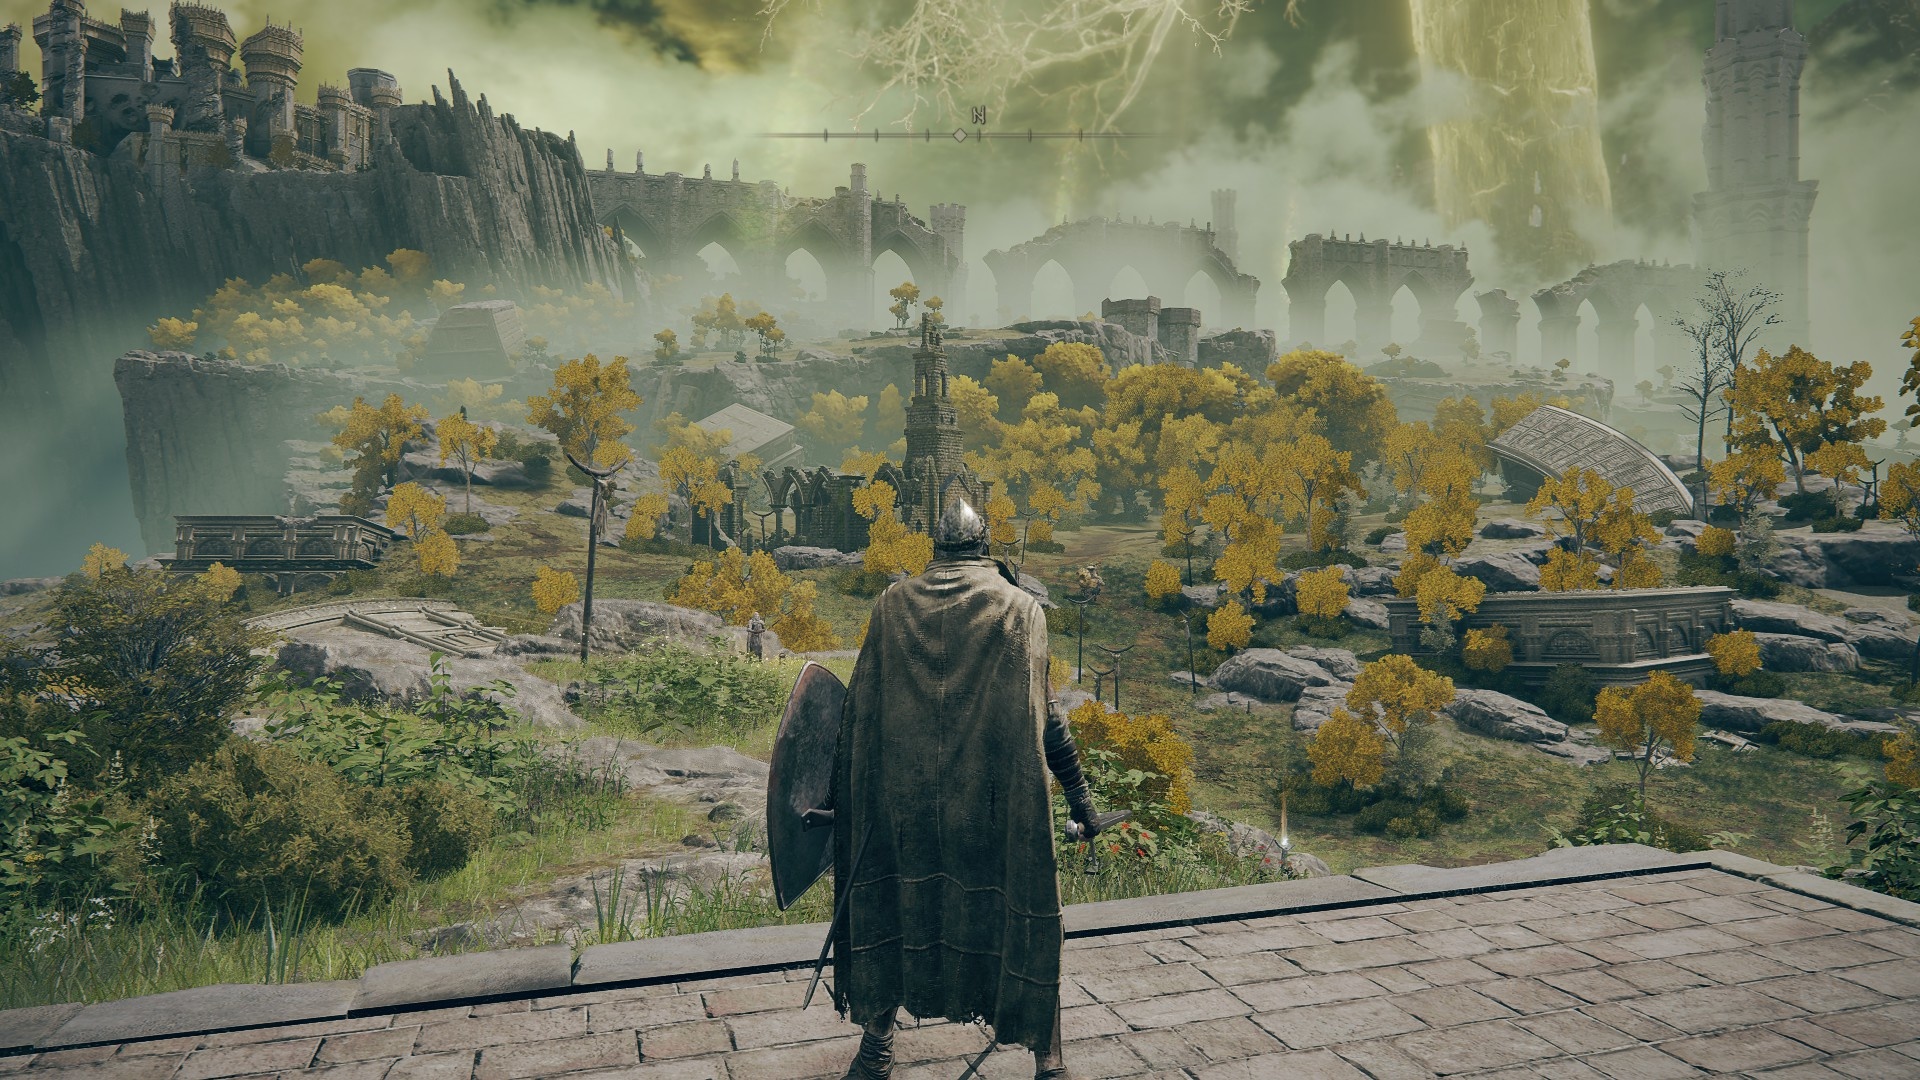 Even a glimpse of the first area, Limgrave, at the start of the game reveals many interesting locations and details such as a golden horseman roaming the landscape or a dilapidated church that may be hiding something useful.